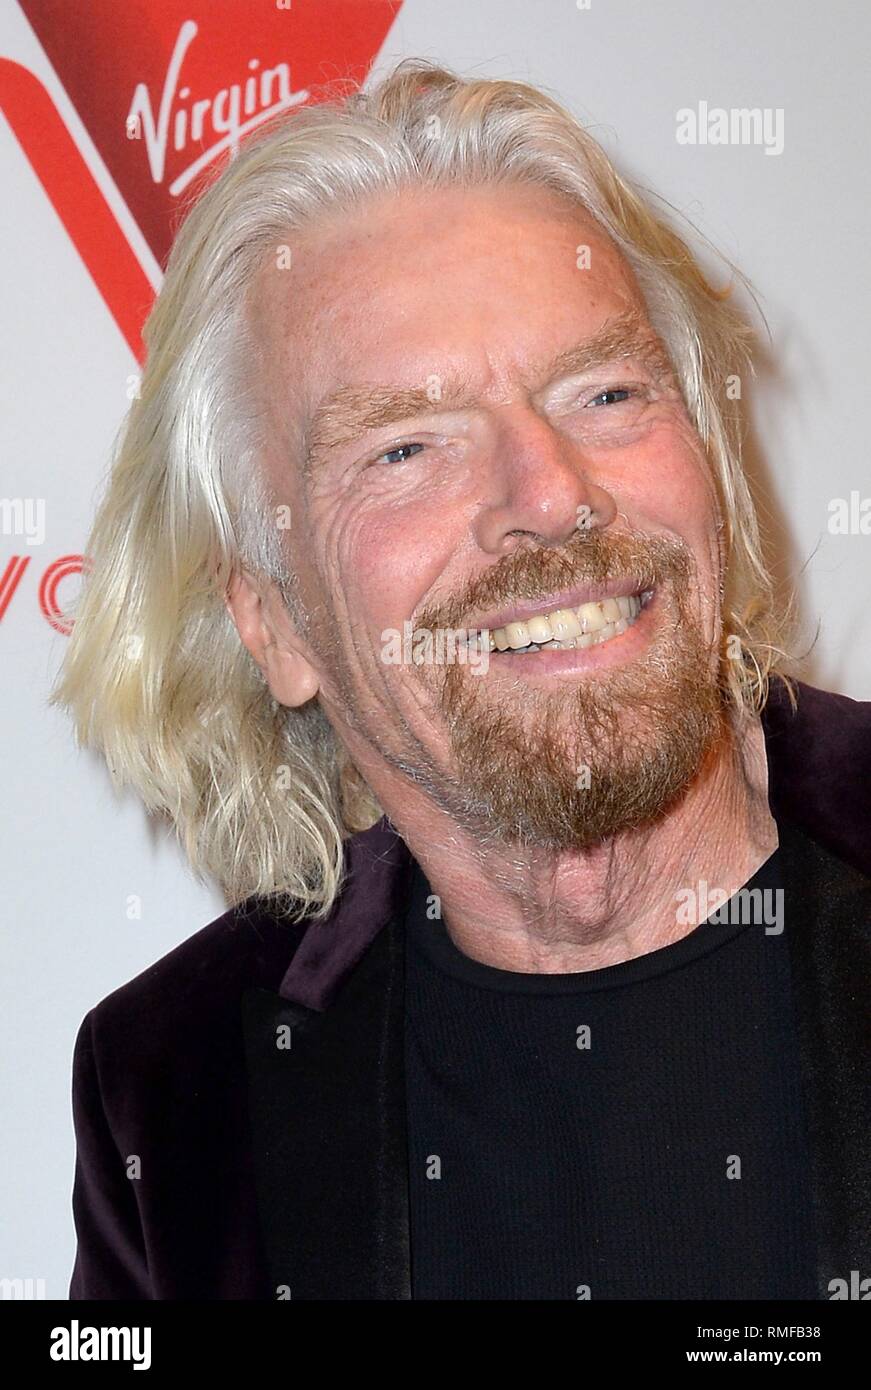 New York, NY, USA. 14th Feb, 2019. Richard Branson at arrivals for Virgin Voyages Hosts Scarlet Night Party, PlayStation Theater, New York, NY February 14, 2019. Credit: Kristin Callahan/Everett Collection/Alamy Live News Stock Photo